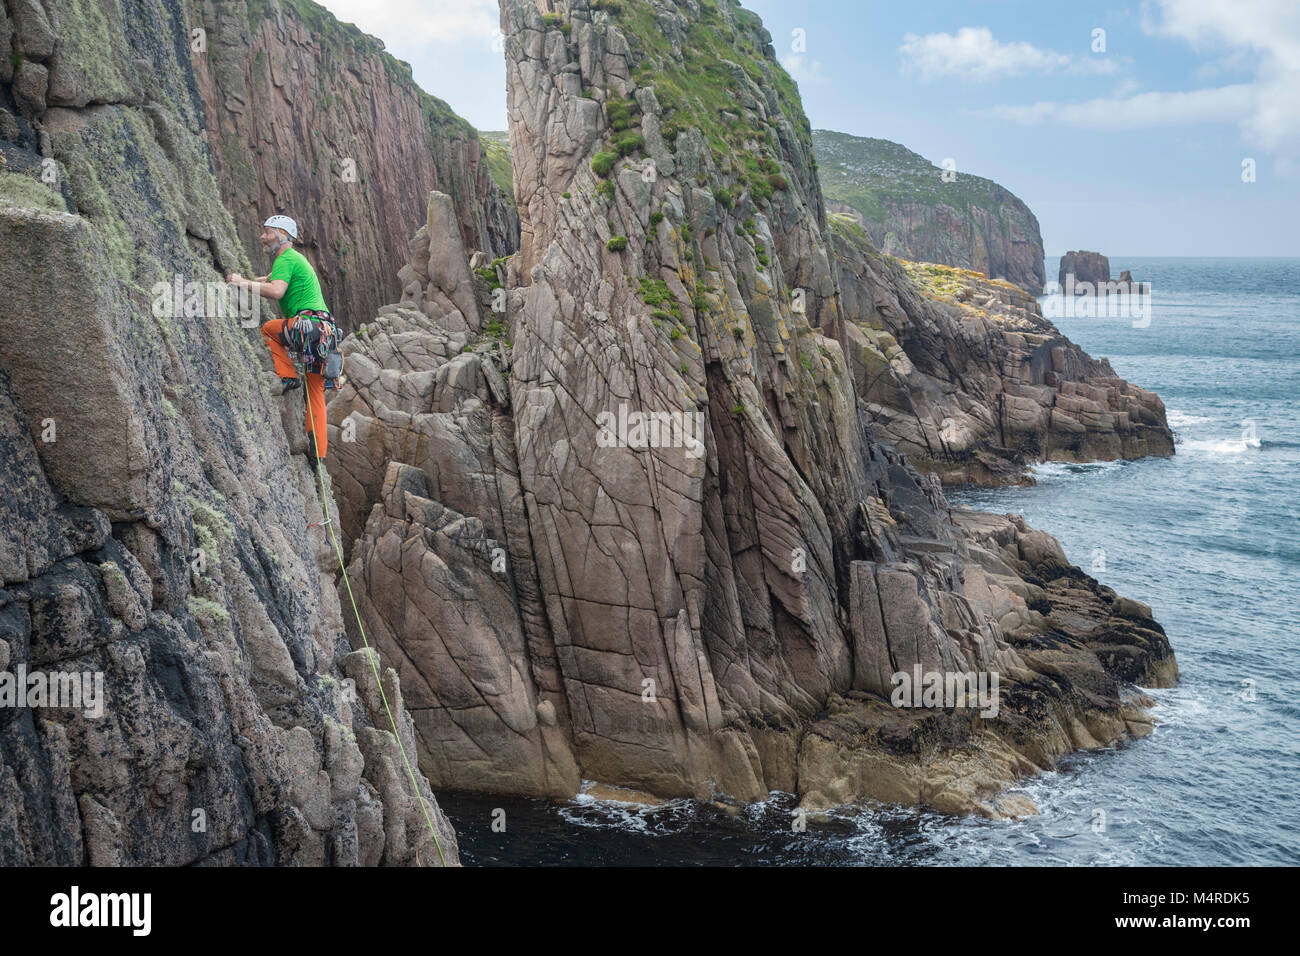 Rock climber on the eastern shore of Owey Island, County Donegal, Ireland. Stock Photo